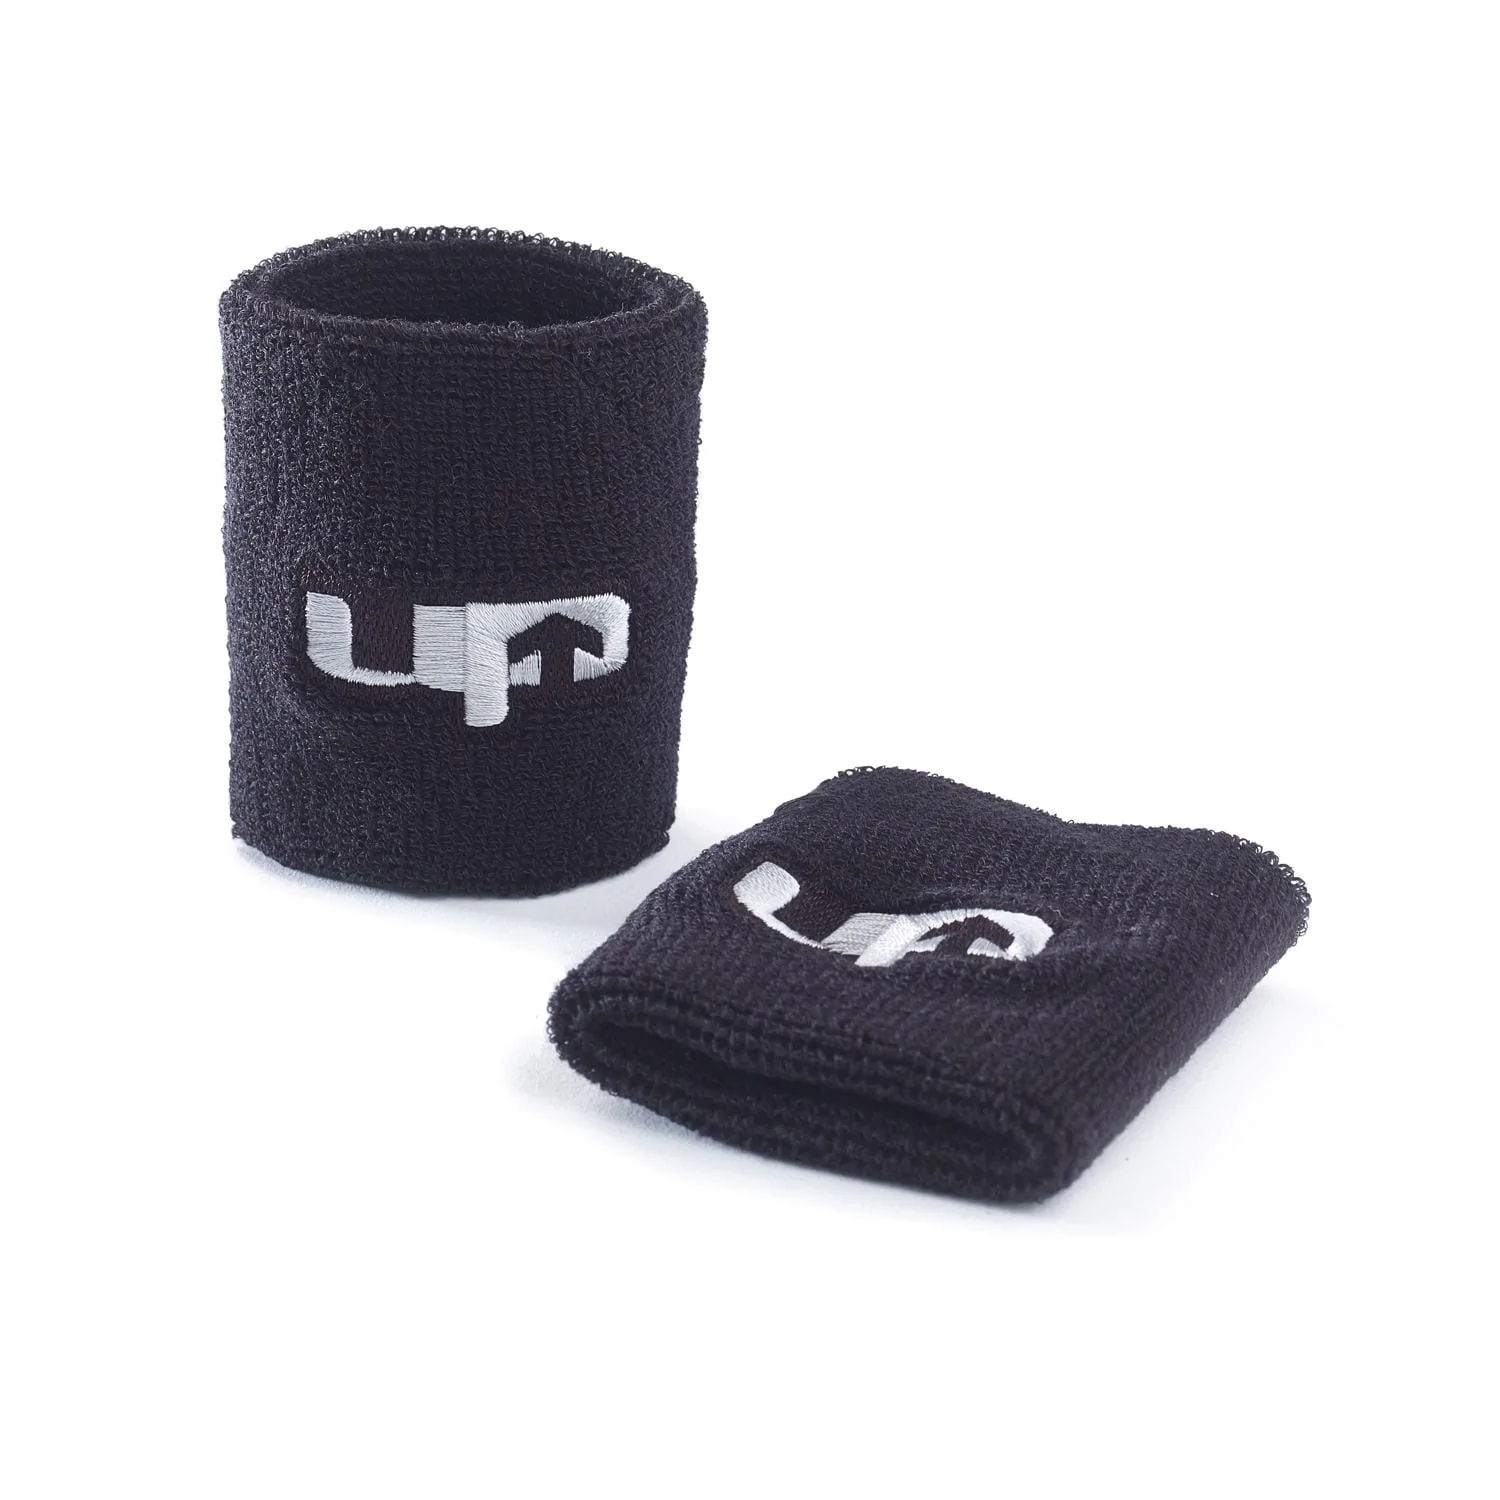 UP STRETCH WRISTBANDS - Compass Point